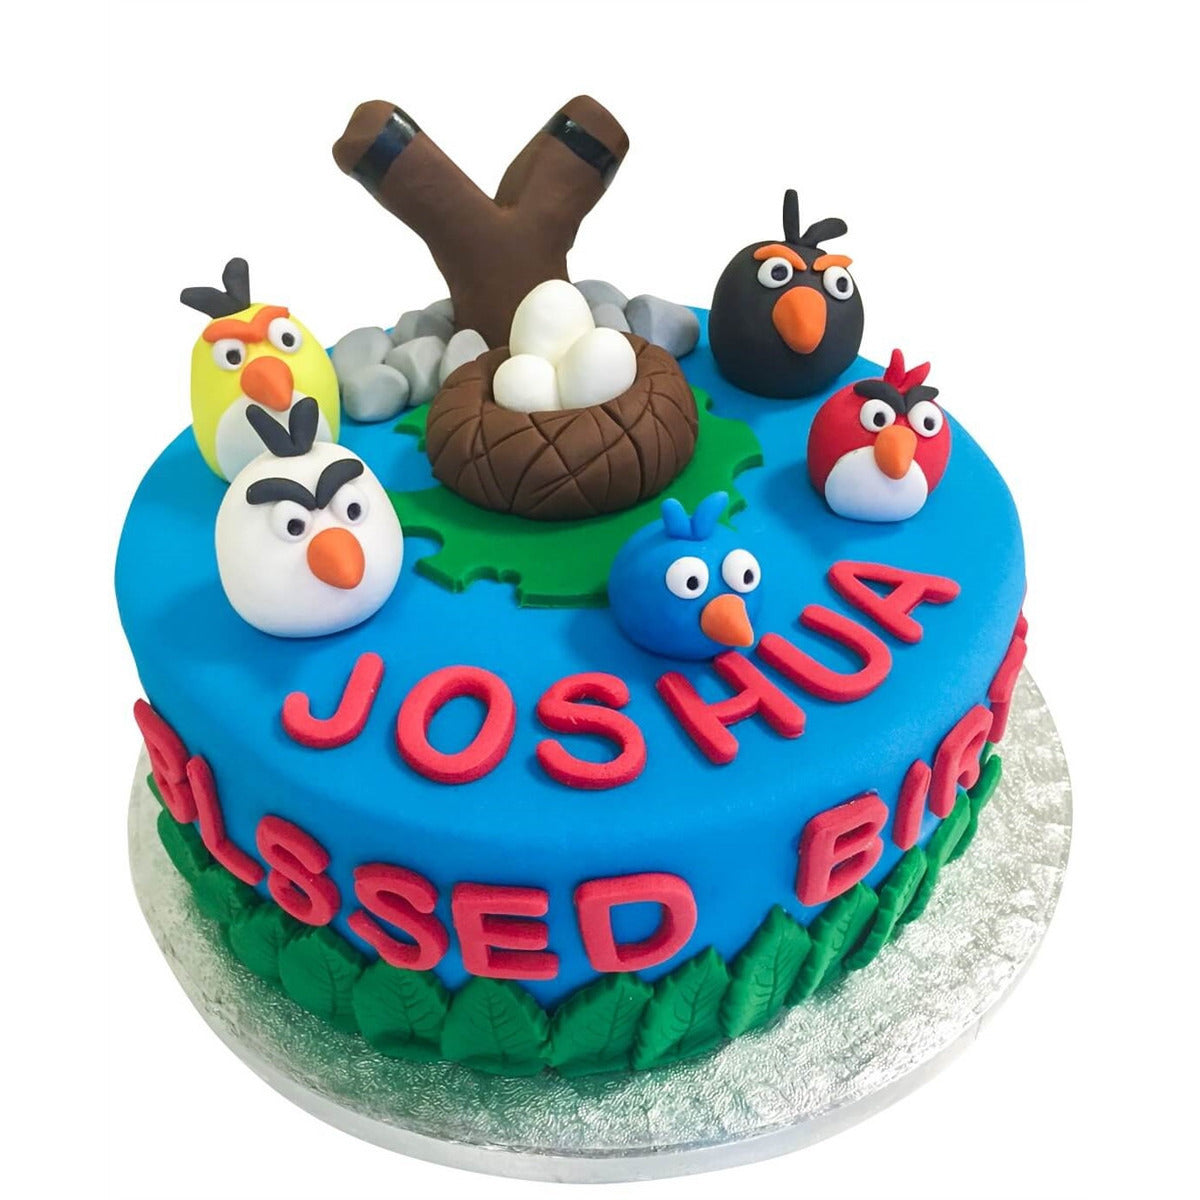 Angry Birds Angry Birds Cake, A Customize Angry Birds cake